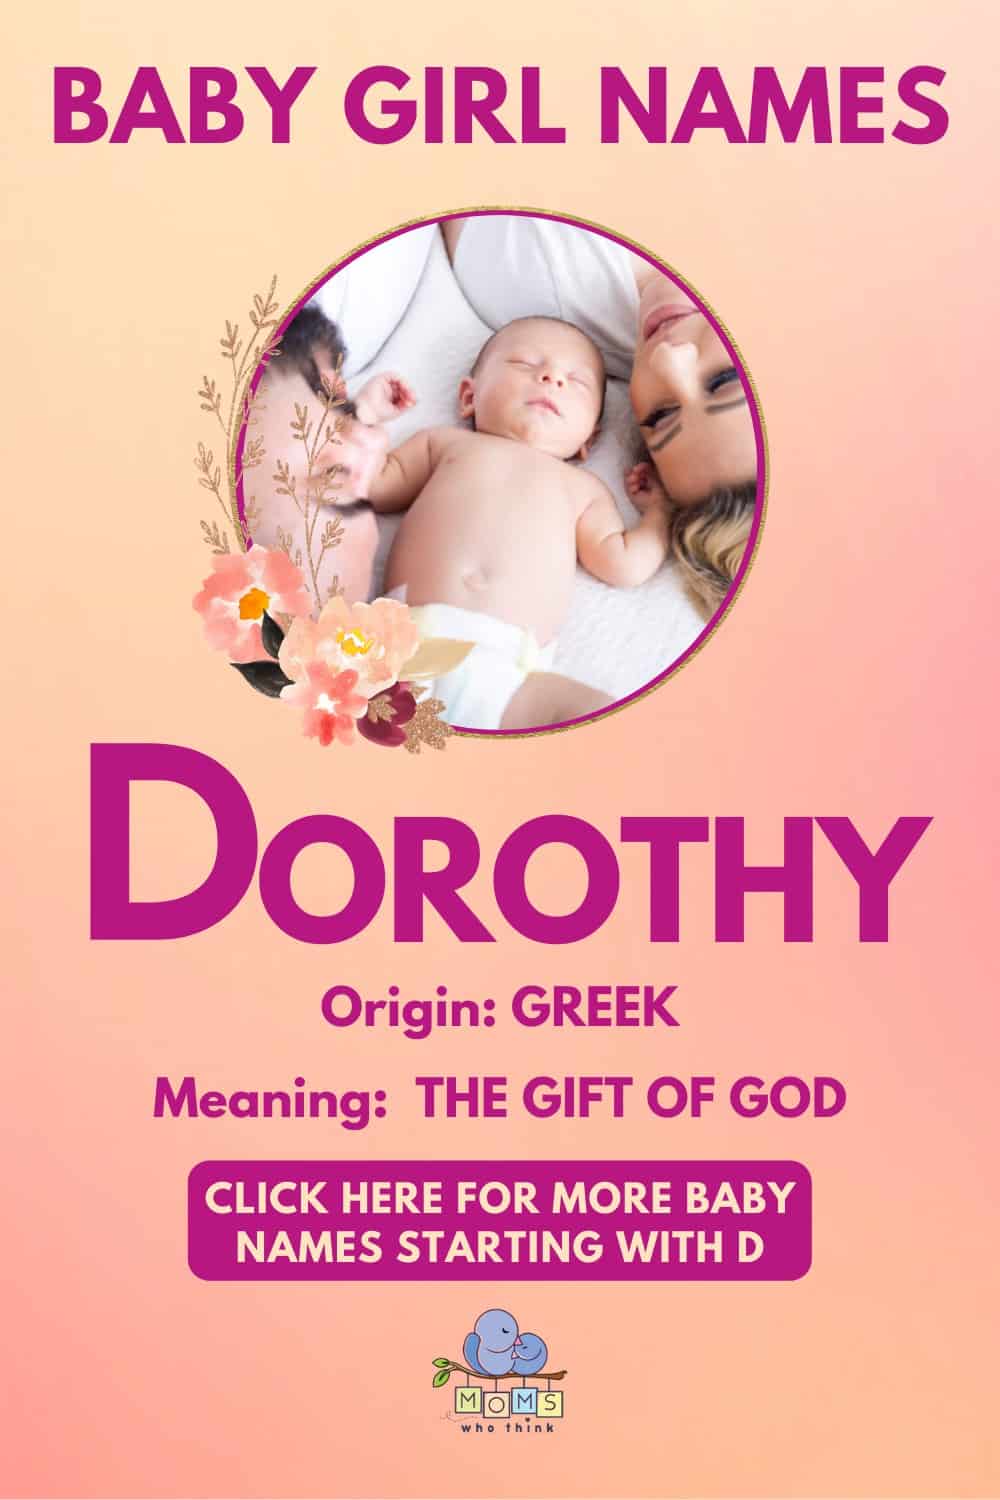 Baby girl name meanings - Dorothy